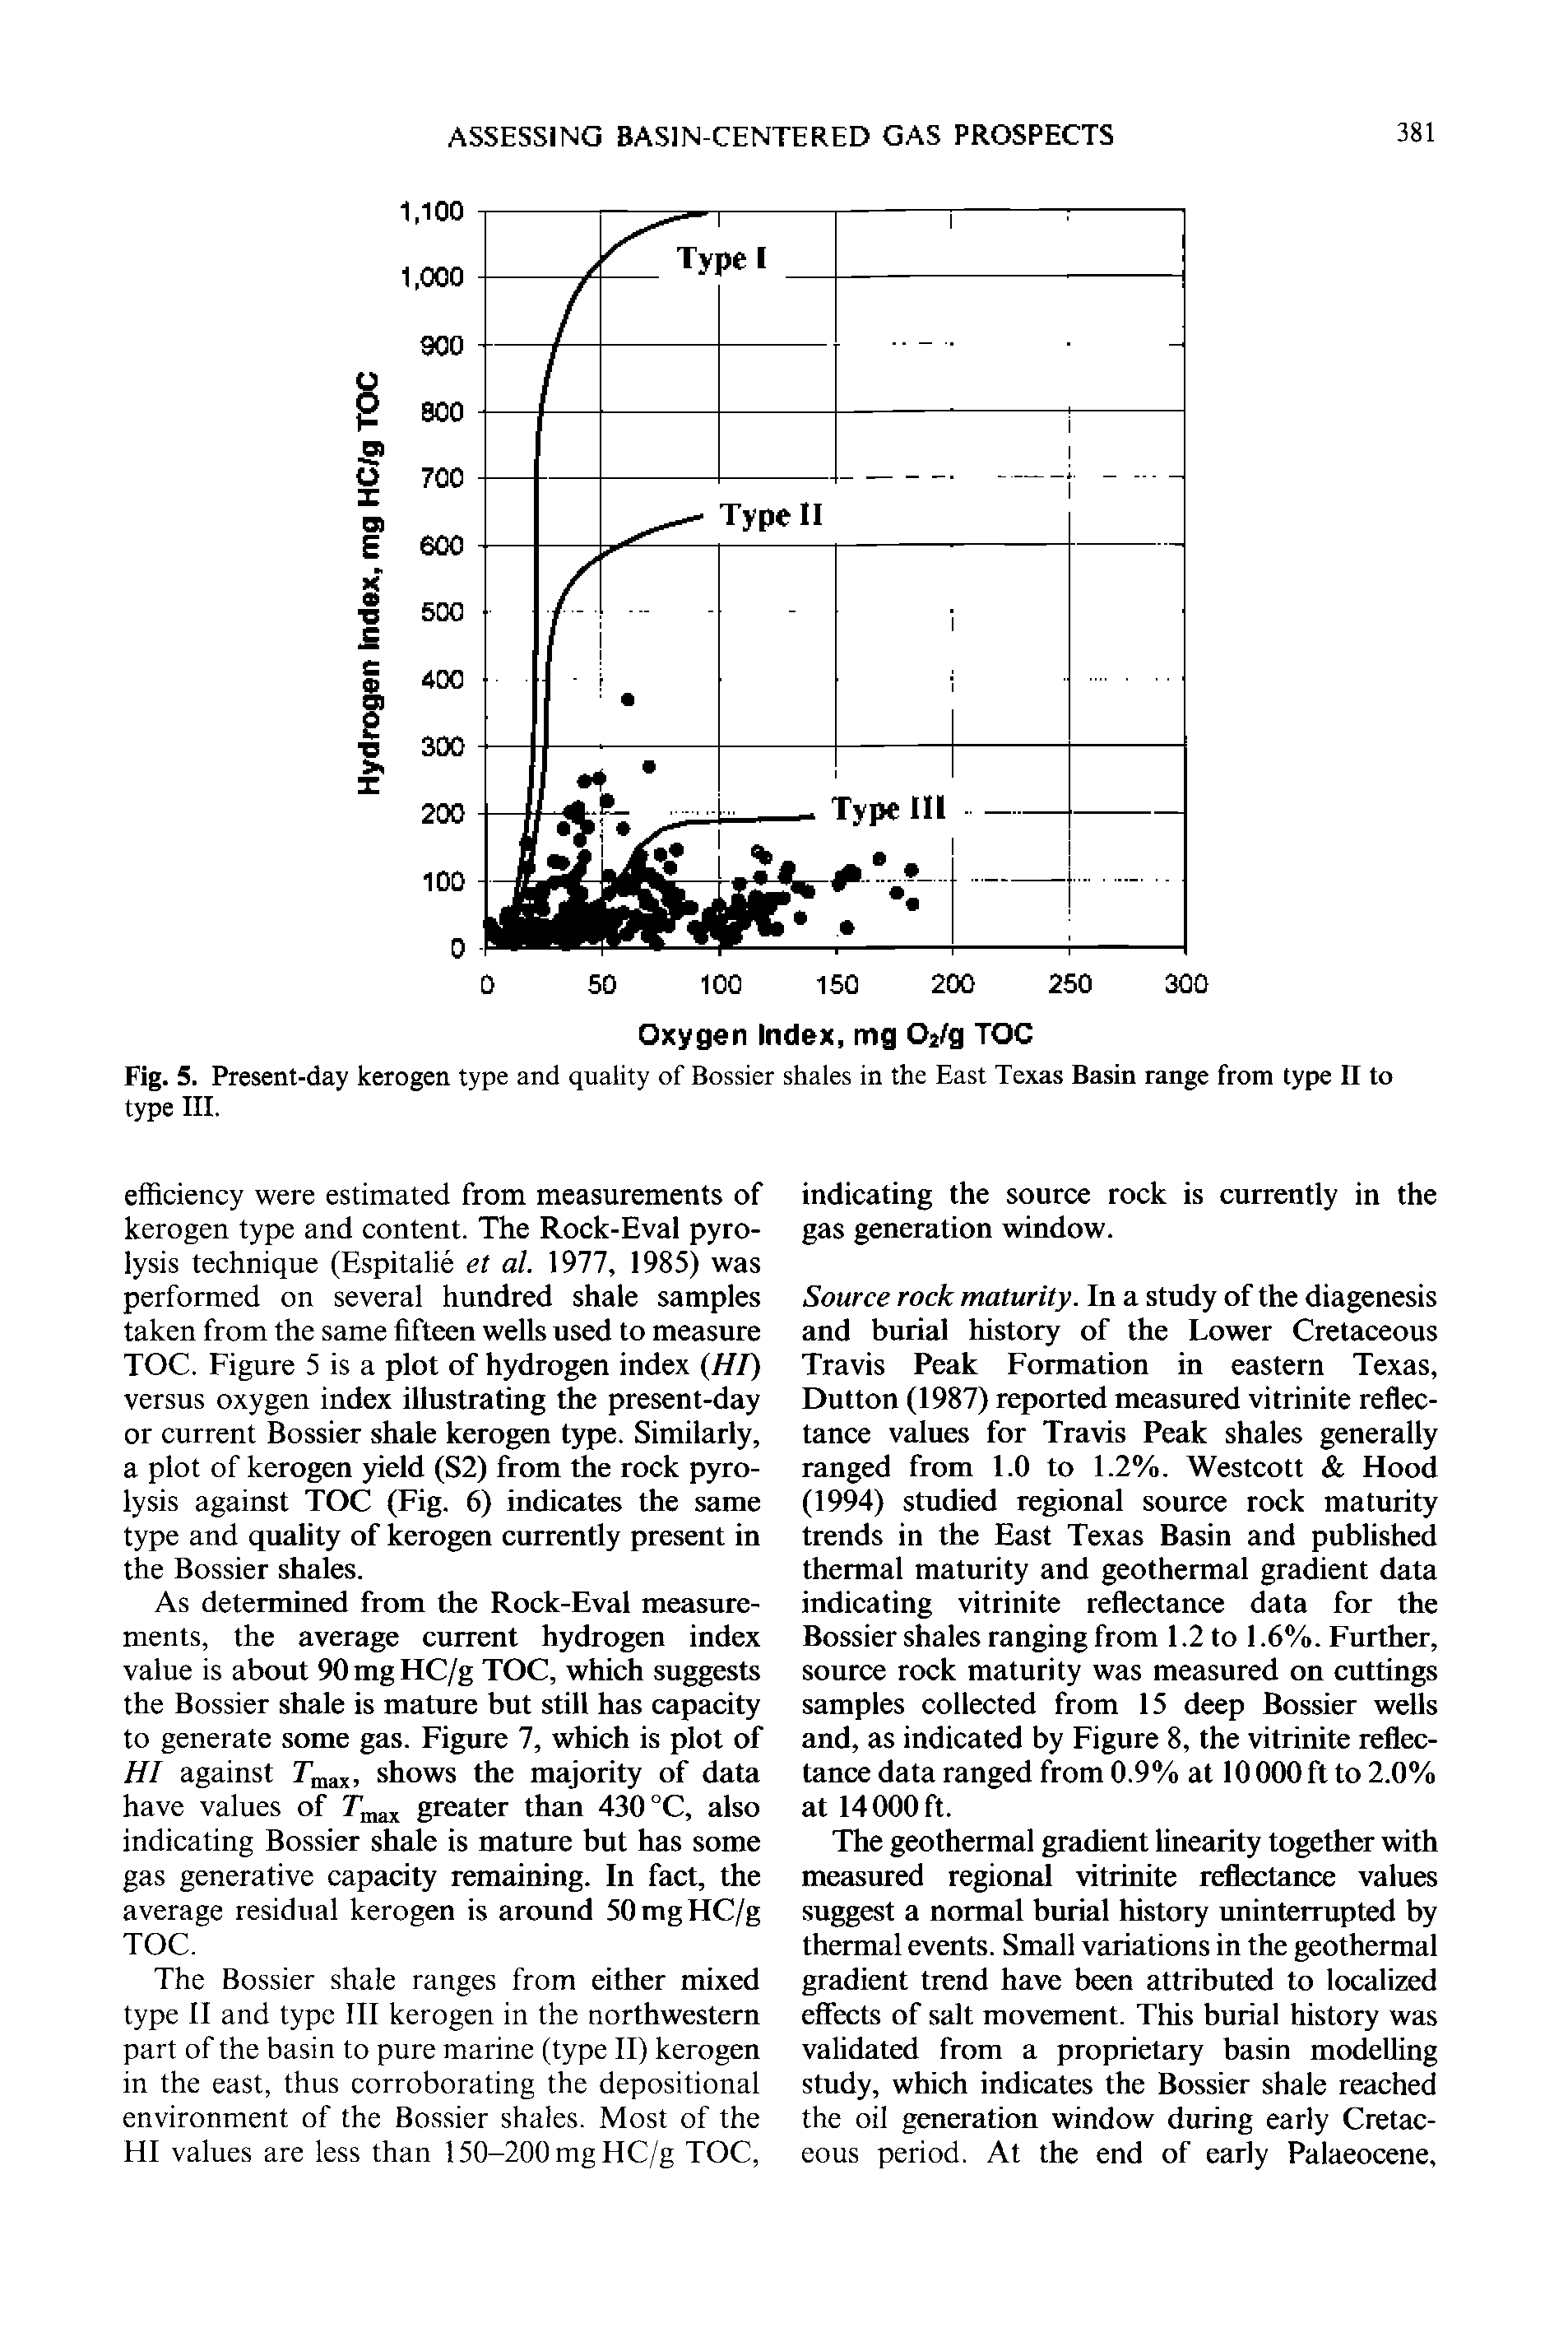 Fig. 5. Present-day kerogen type and quality of Bossier shales in the East Texas Basin range from type II to type III.